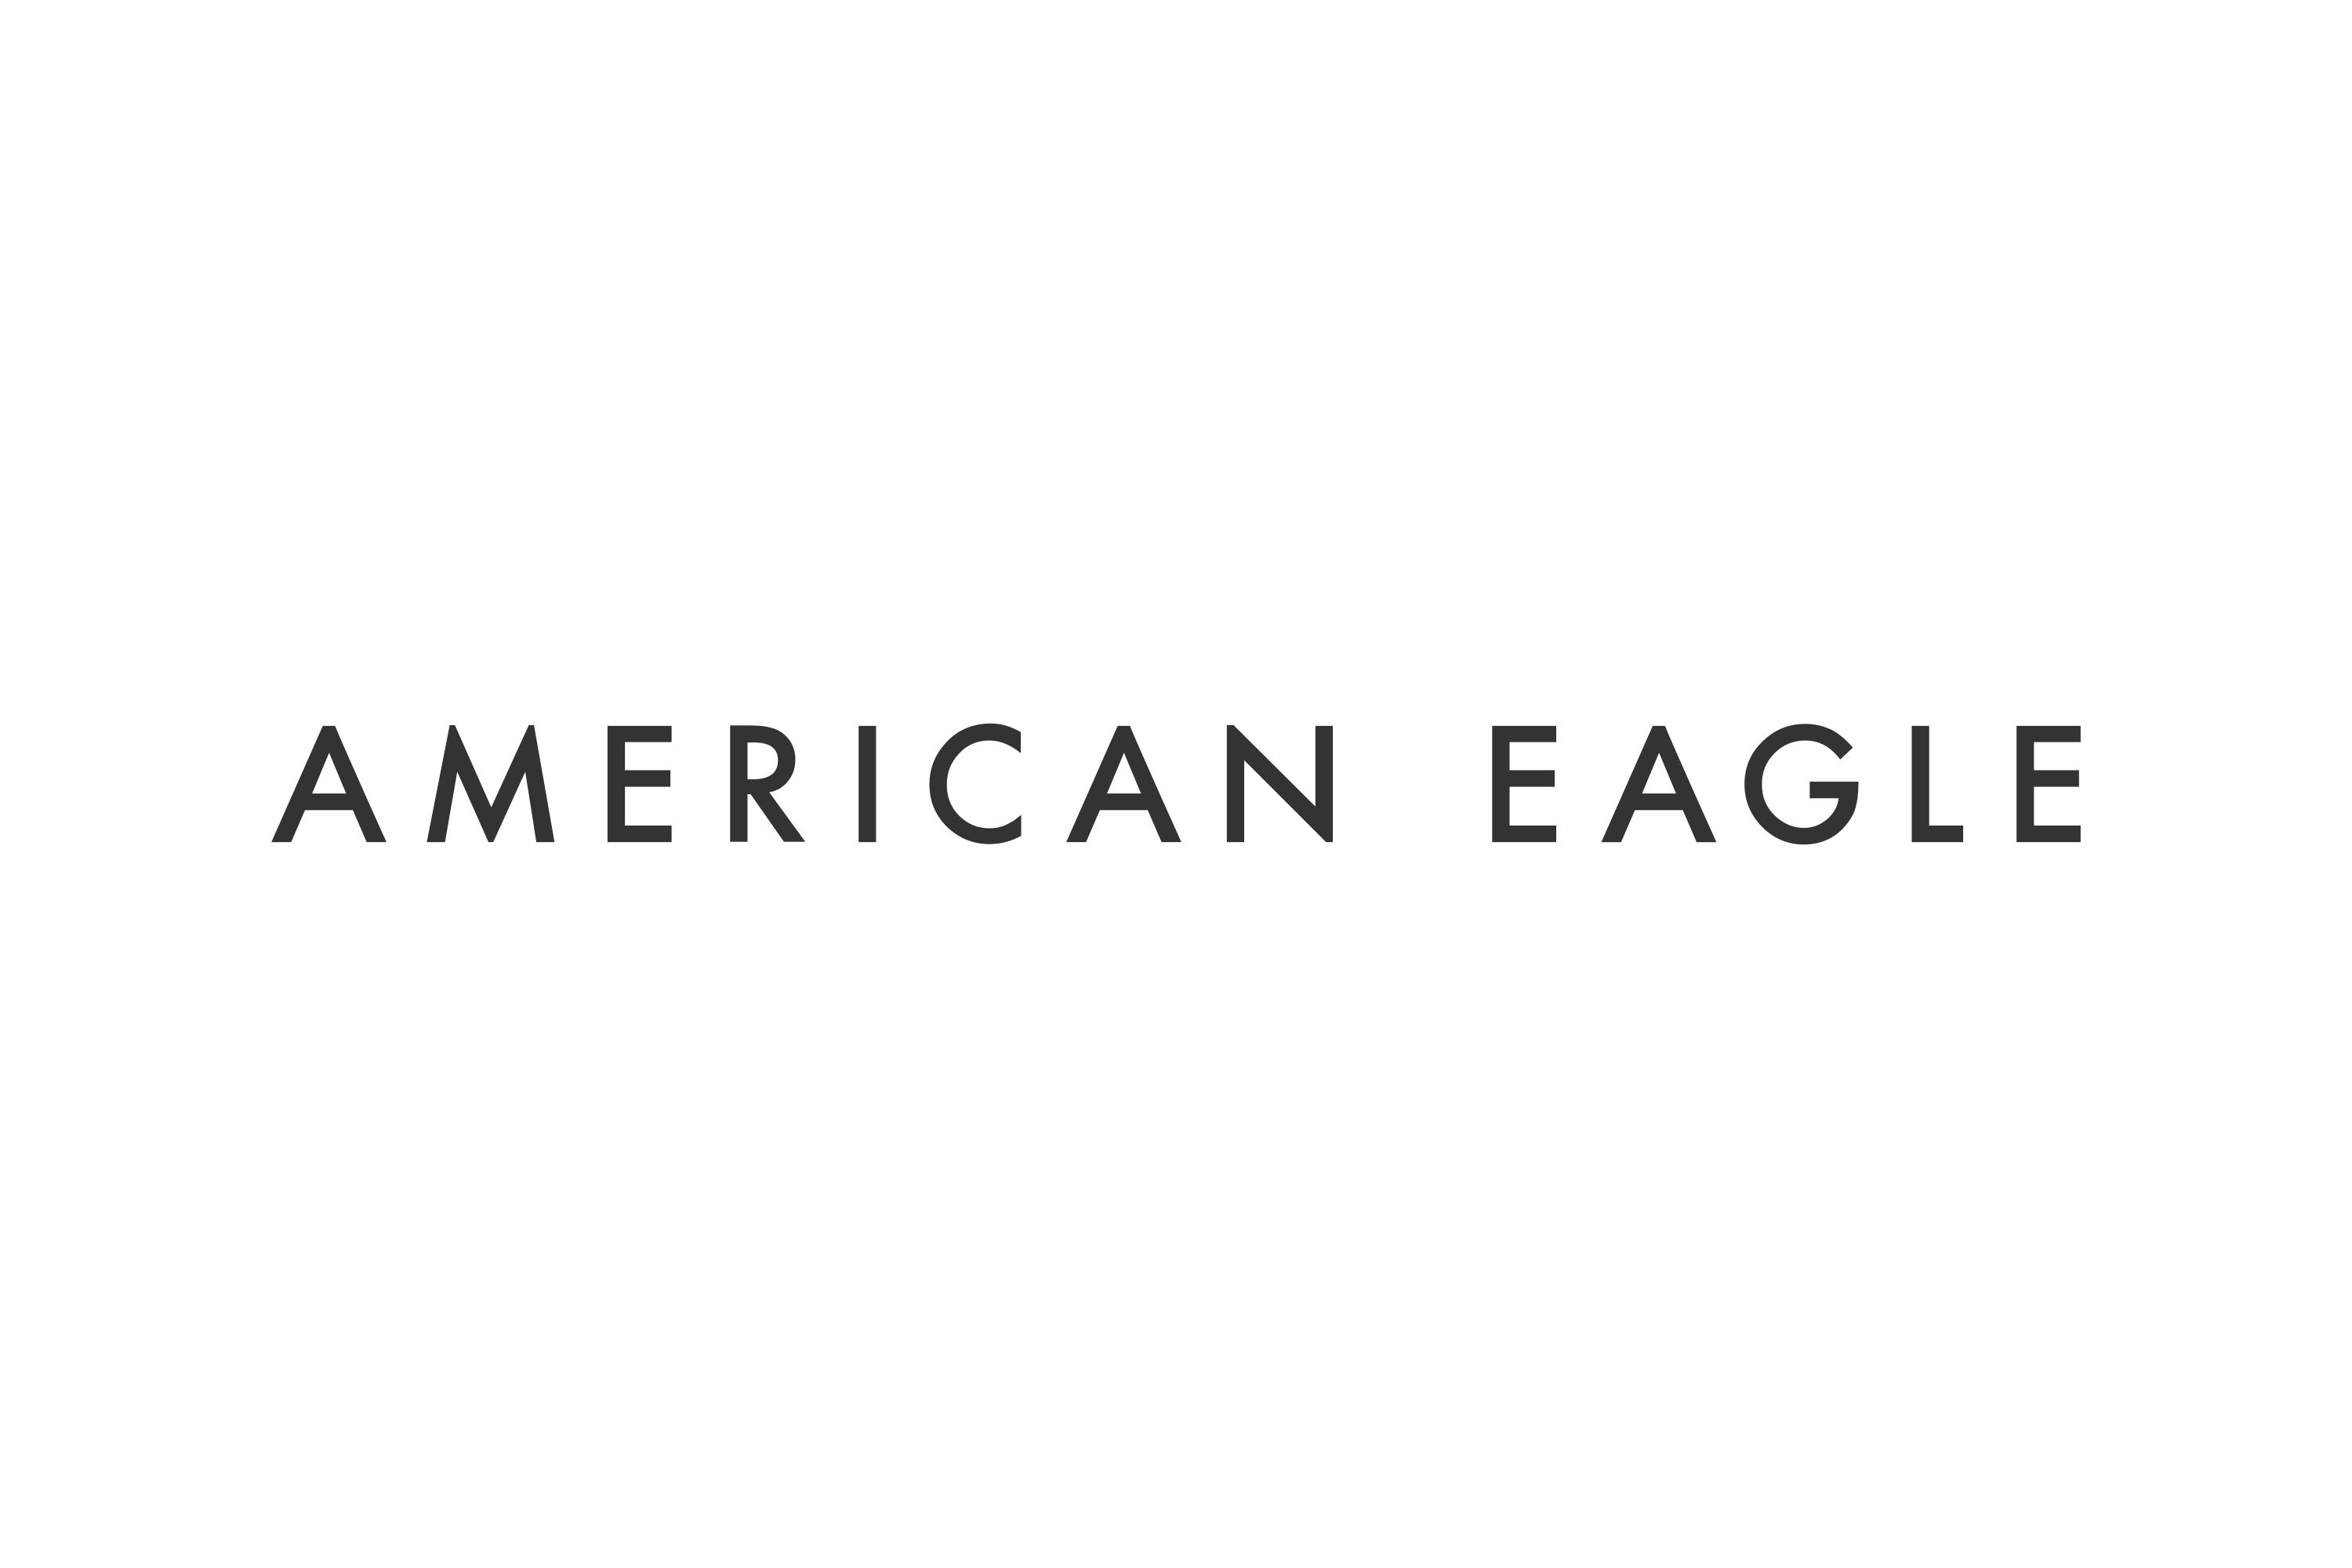 American Eagle Logo And Symbol, Meaning, History, PNG, Brand | vlr.eng.br